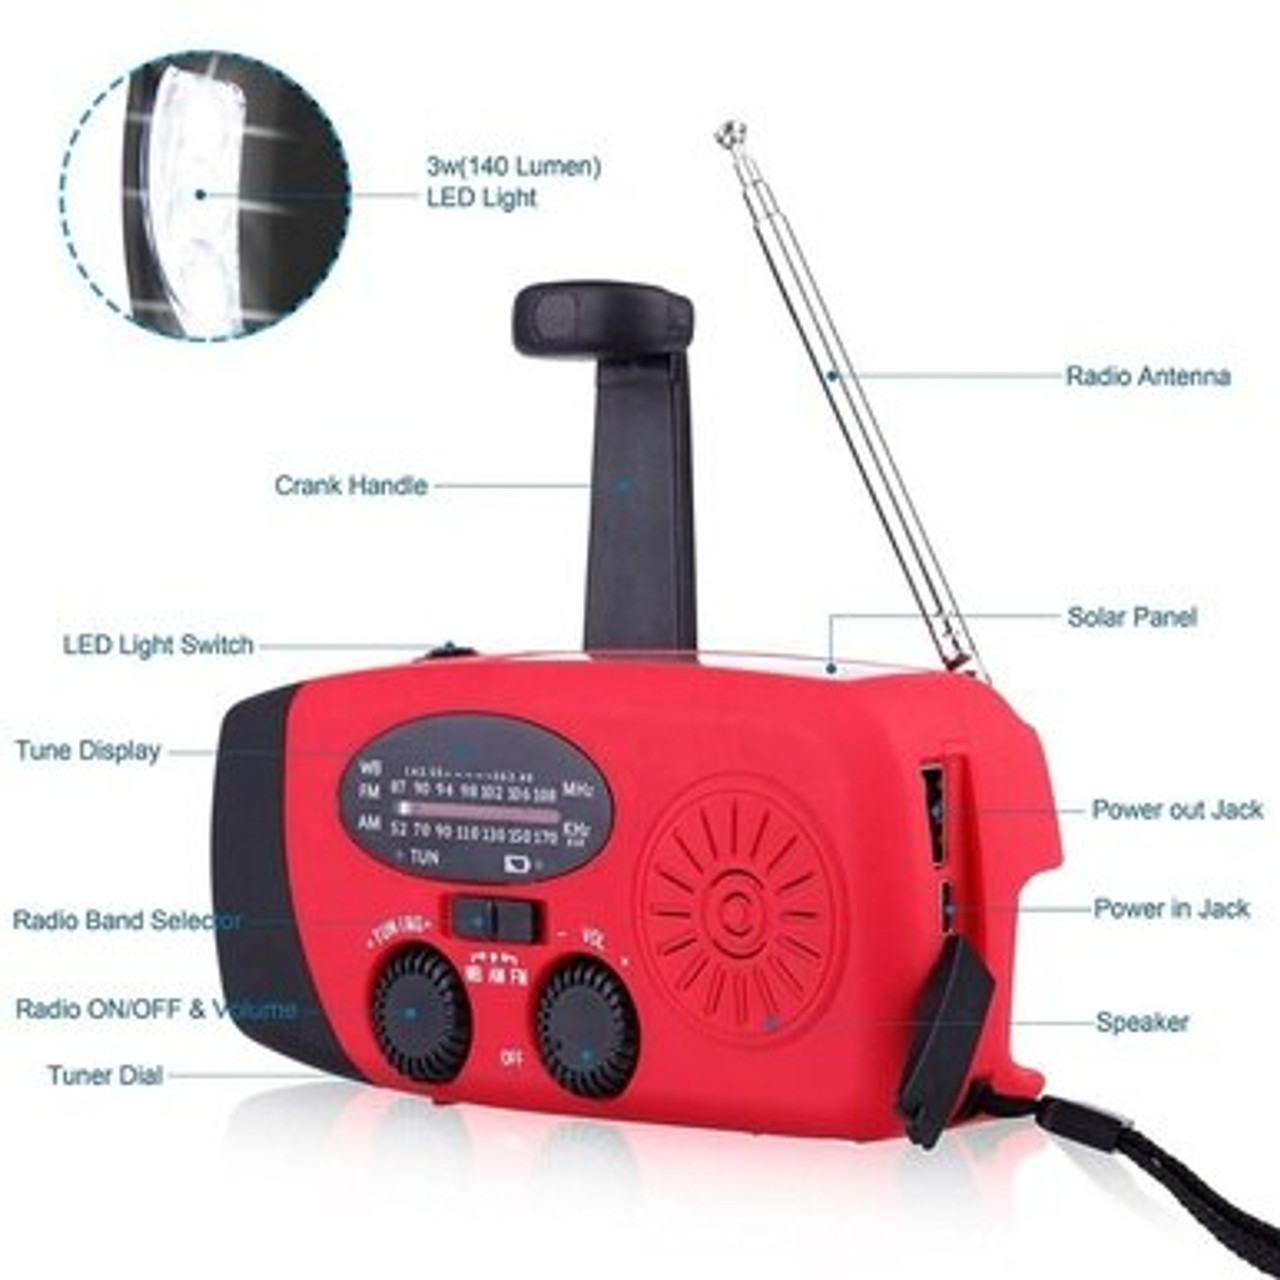 https://cdn11.bigcommerce.com/s-ovptlwt64t/images/stencil/1280x1280/products/578/1963/EMERGENCY-SOLAR-HAND-CRANK-WEATHER-RADIO-WITH-FLASHLIGHT-2__16236.1594131025.jpg?c=1?imbypass=on